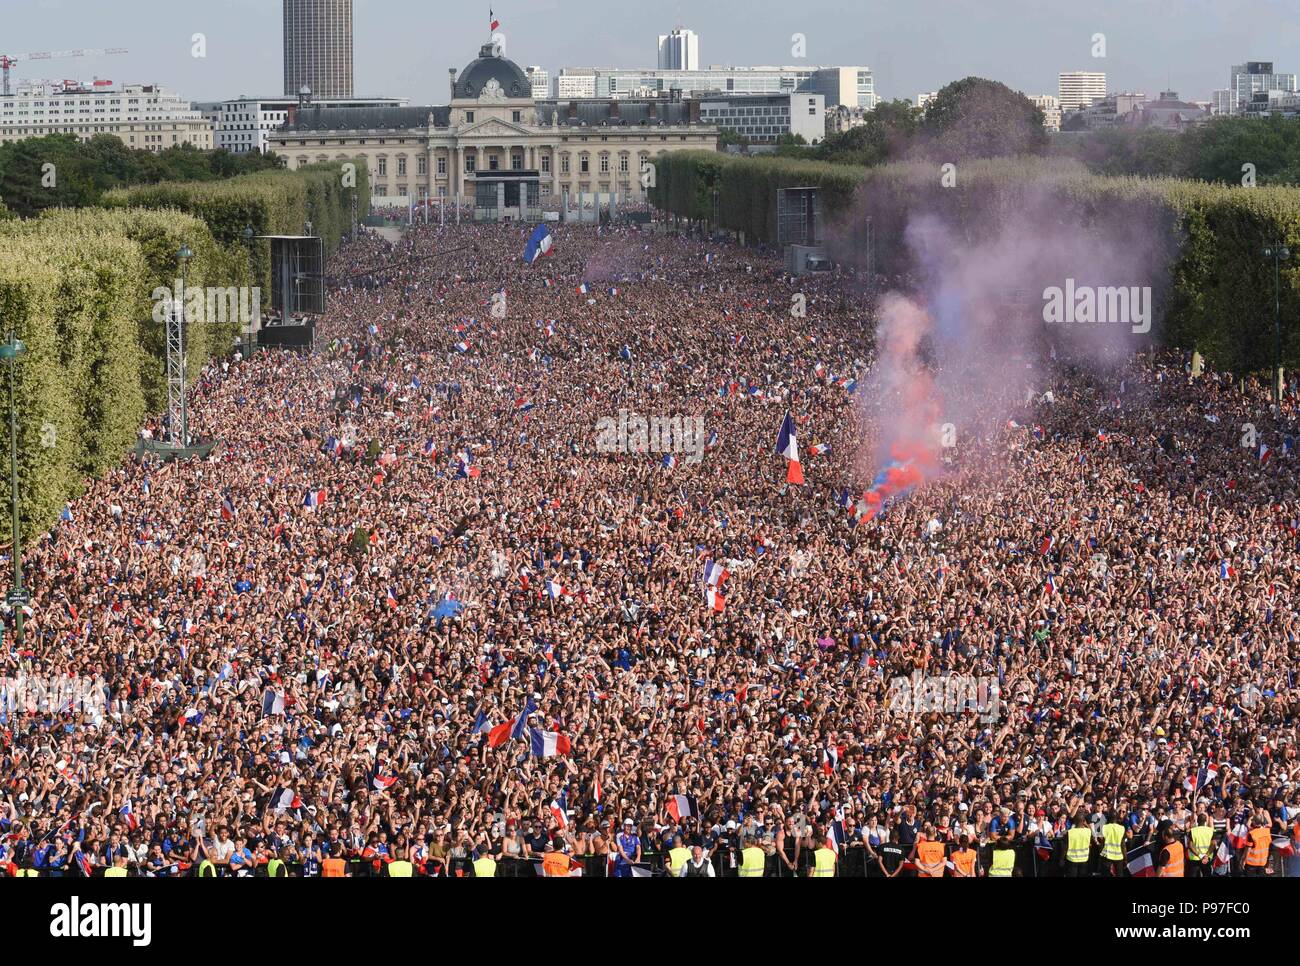 Paris, France. 15th July 2018. Supporters of the French football team at  the Champ-de-Mars fan zone celebrate as France win its World Cup Final  against Croatia 4-2. Des supporters de l'equipe de